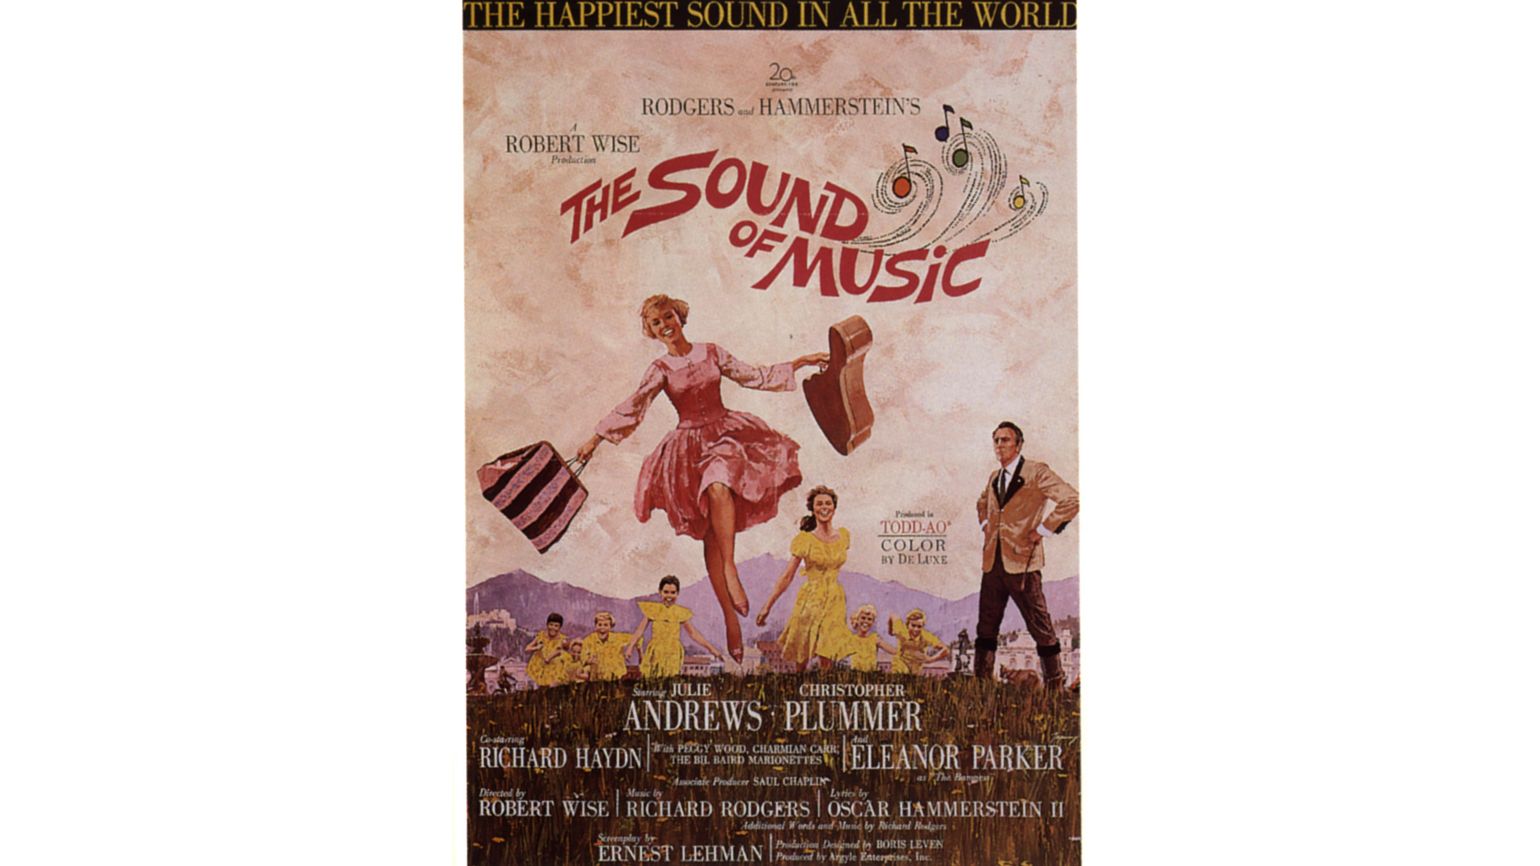 The Sound of Music, 1965, 1960s, USA. FOR EDITORIAL USE ONLY/NO MERCHANDISING/NO ALTERATION.